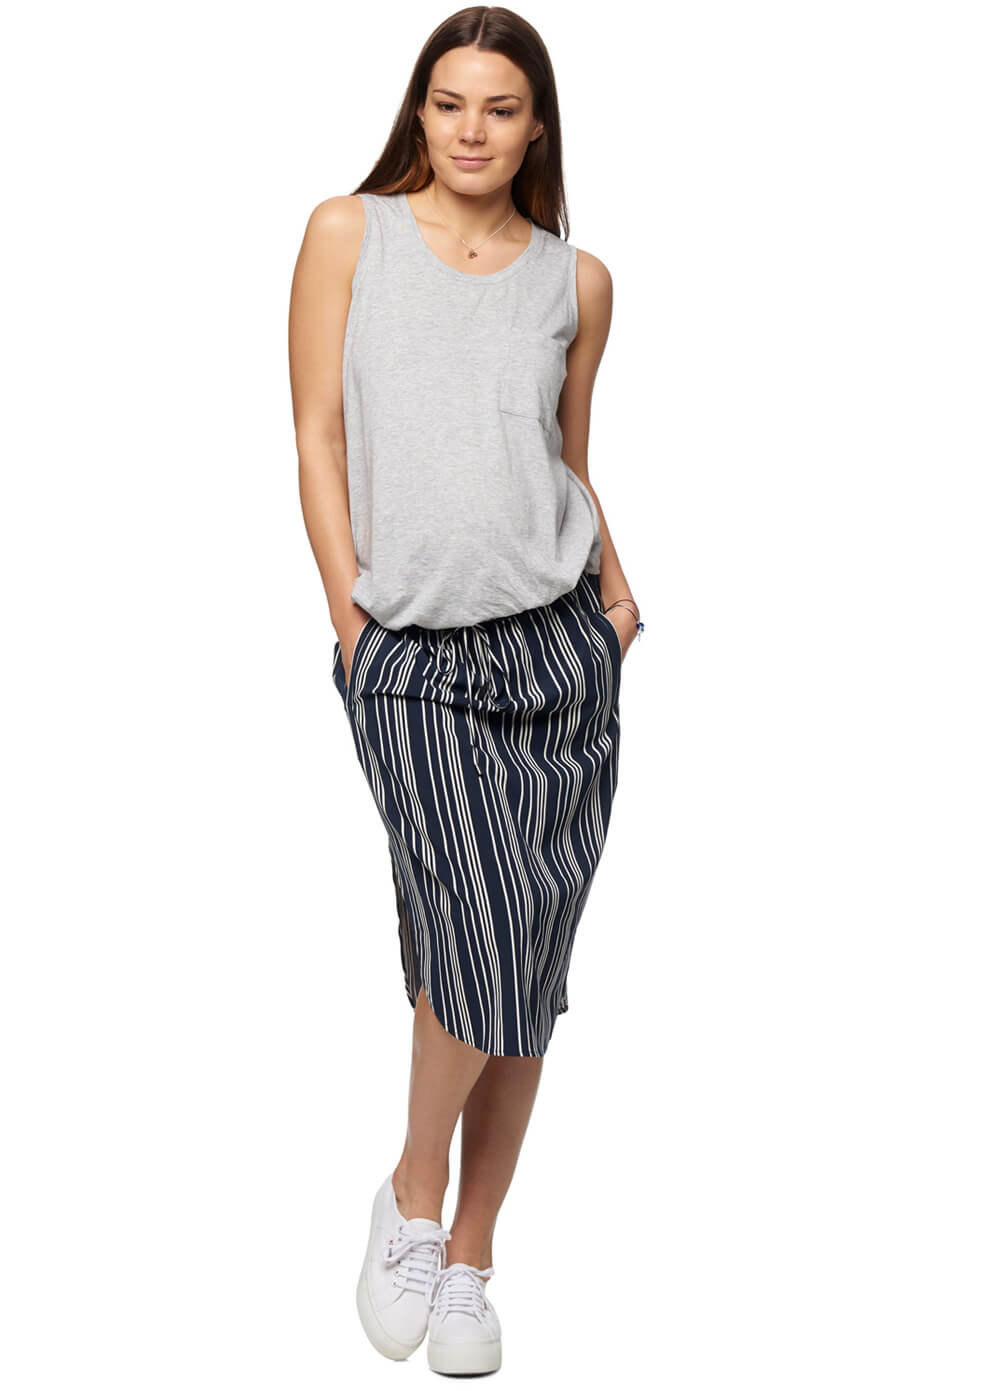 Mind Over Matter Maternity Skirt in Navy Stripes by Bae The Label